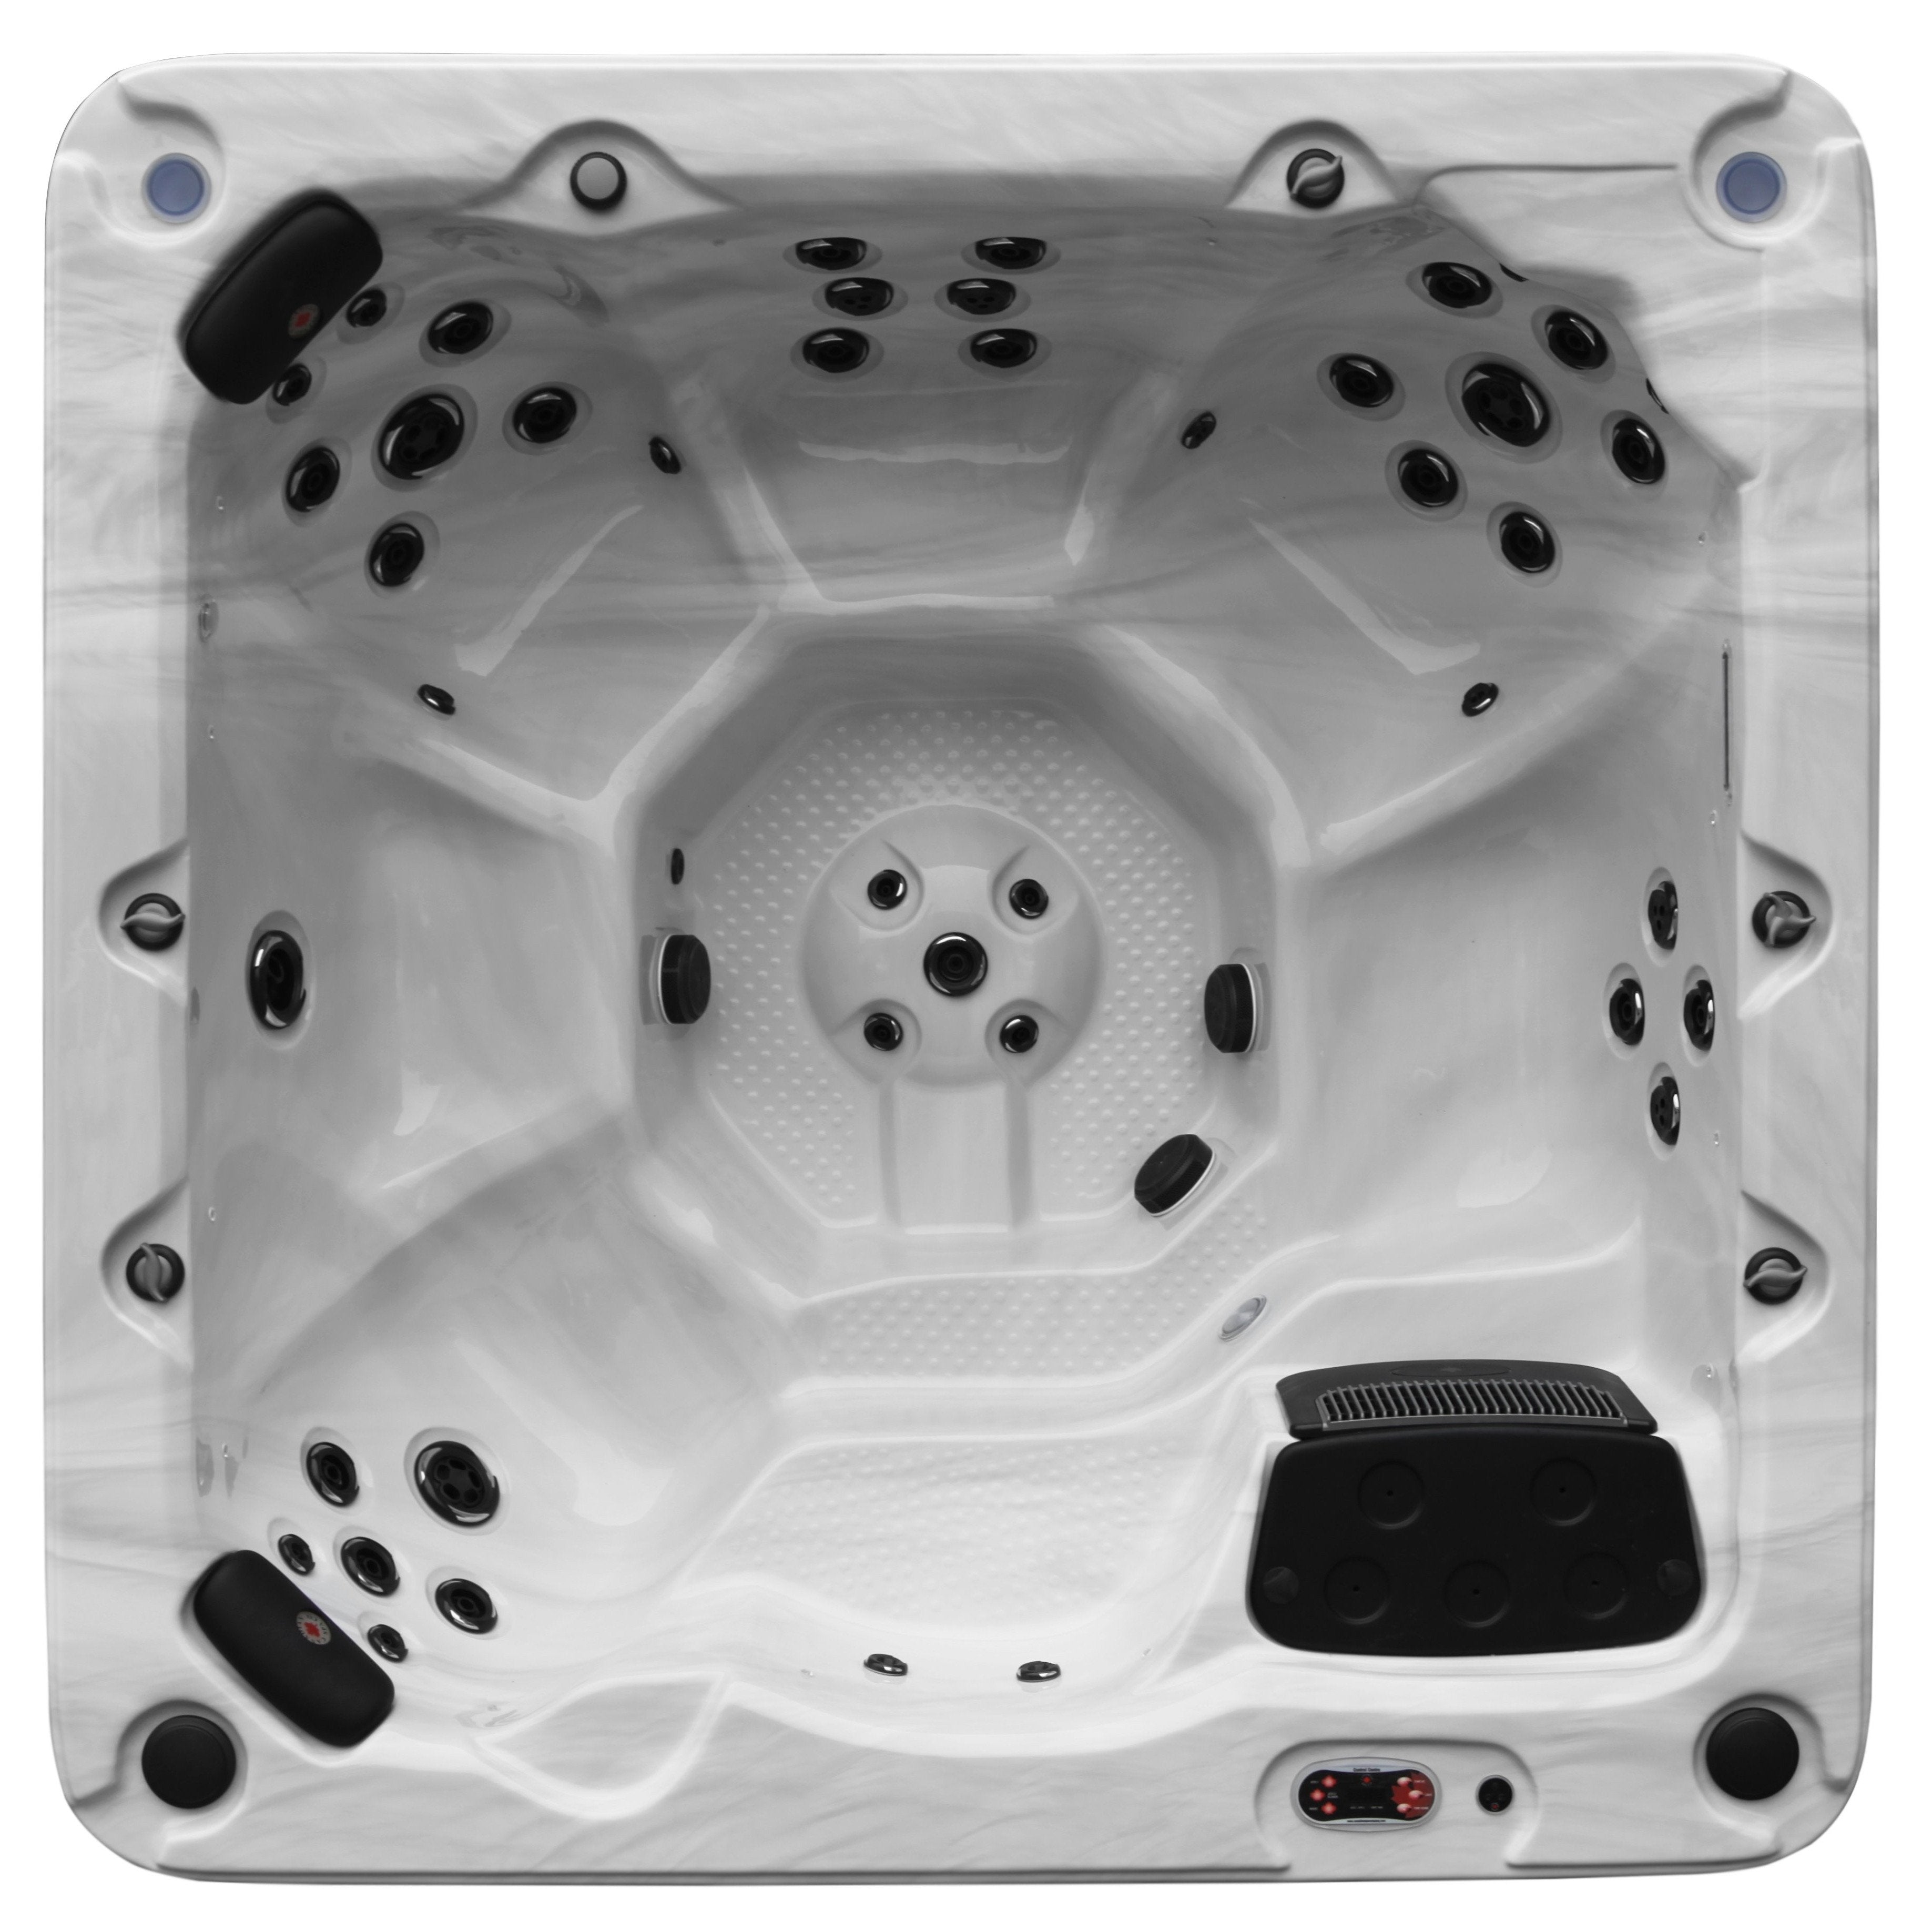 Victoria 7-Person Hot Tub Jacuzzi w/ 46-Jets (KH-10110)